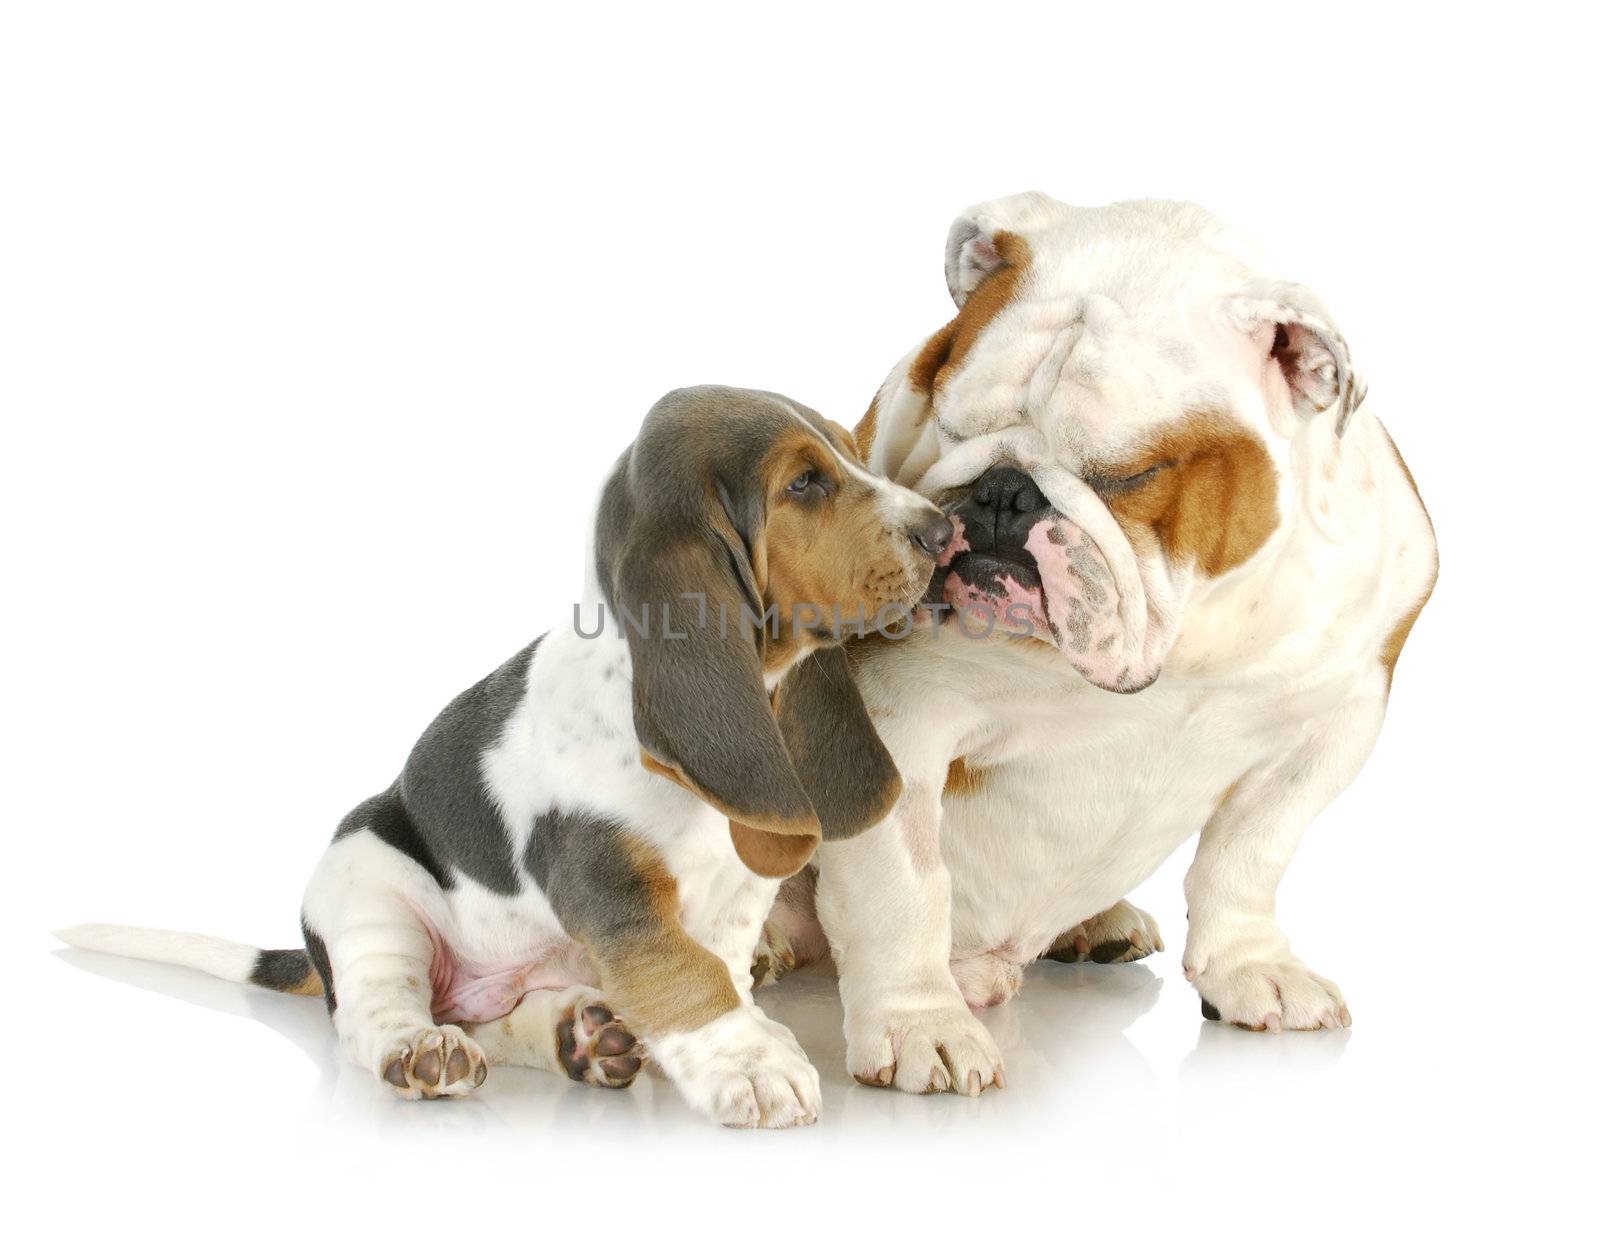 puppy love - cute basset hound and english bulldog together on white background